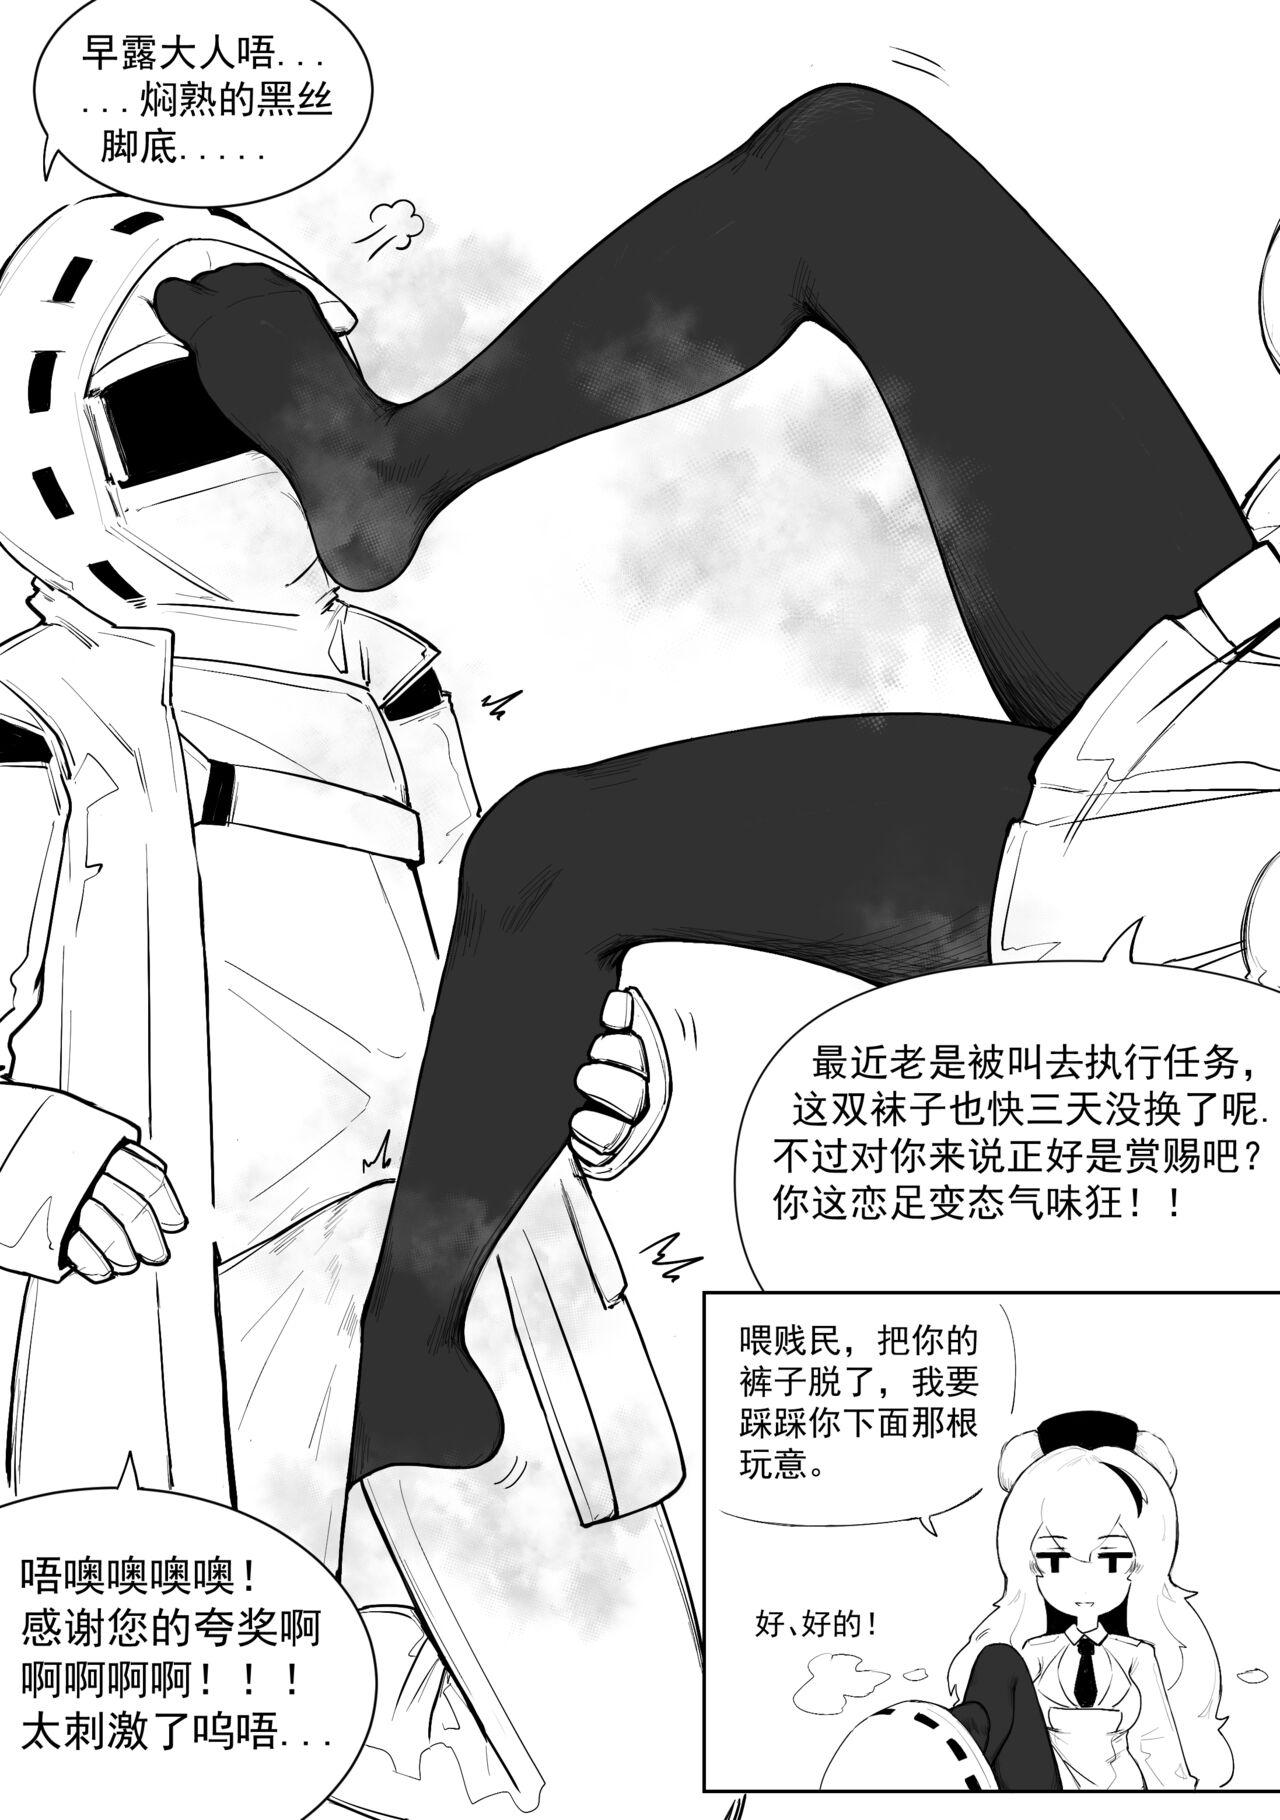 Casting 澄澈之冰 早露 - Arknights Amateur Sex - Page 3